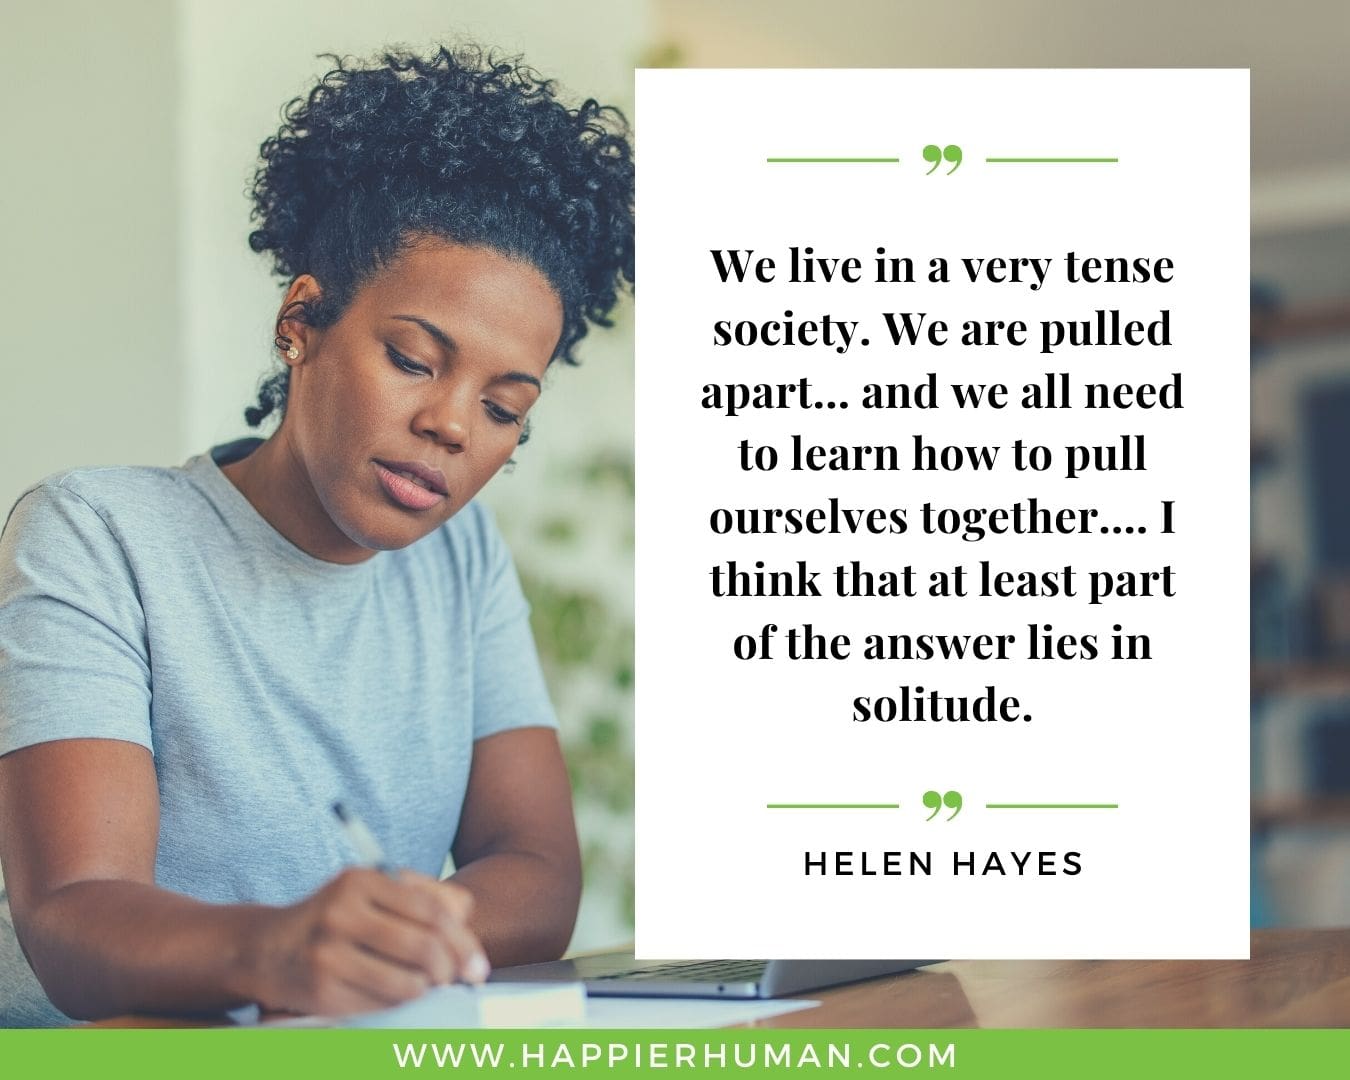 Loneliness Quotes - “We live in a very tense society. We are pulled apart... and we all need to learn how to pull ourselves together.... I think that at least part of the answer lies in solitude.”– Helen Hayes